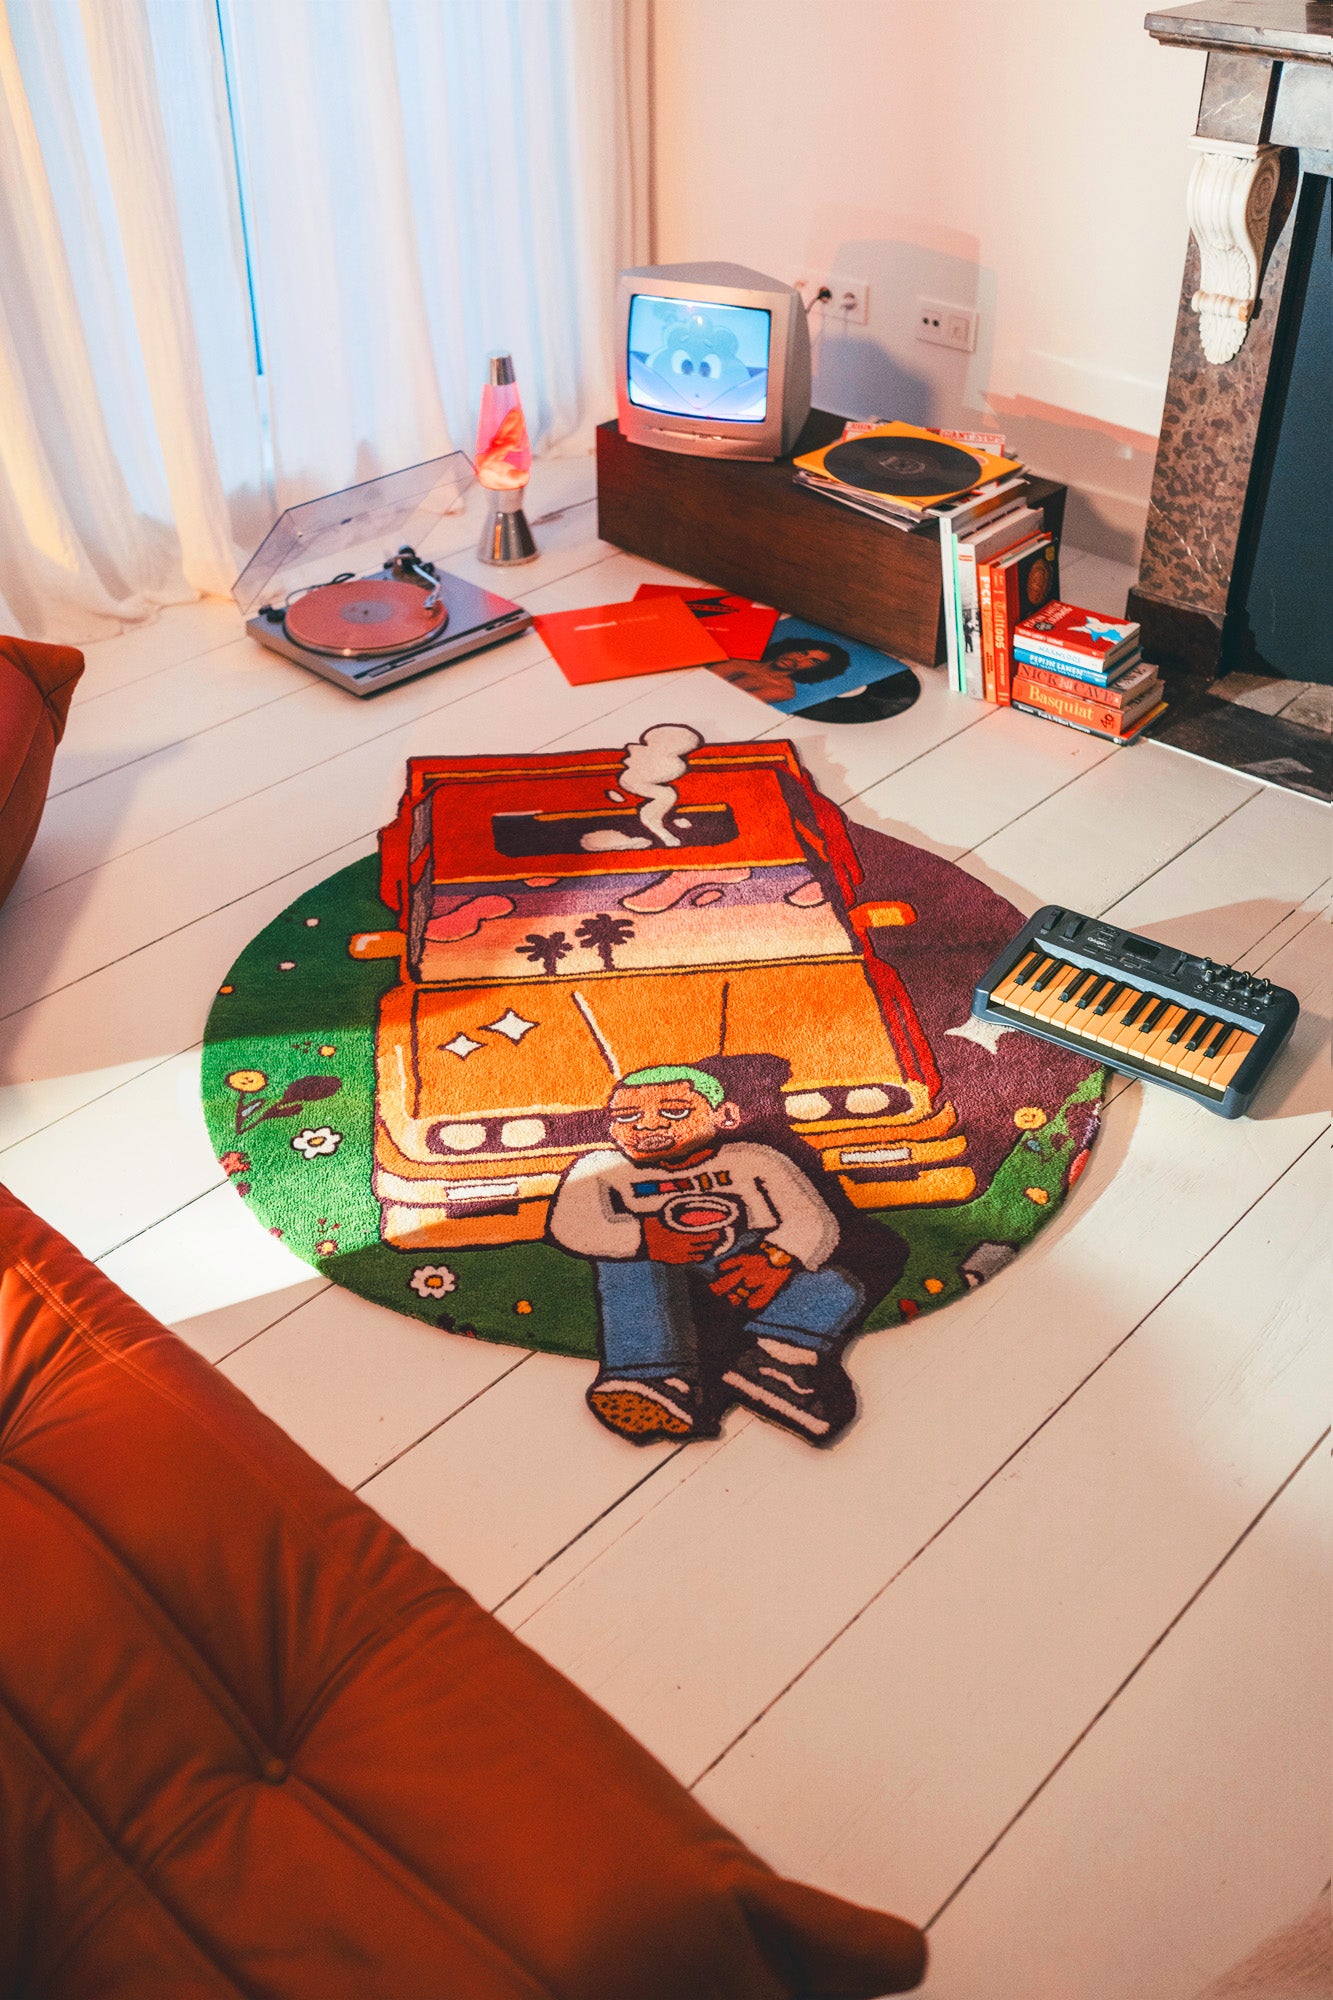 "Solo", the rug